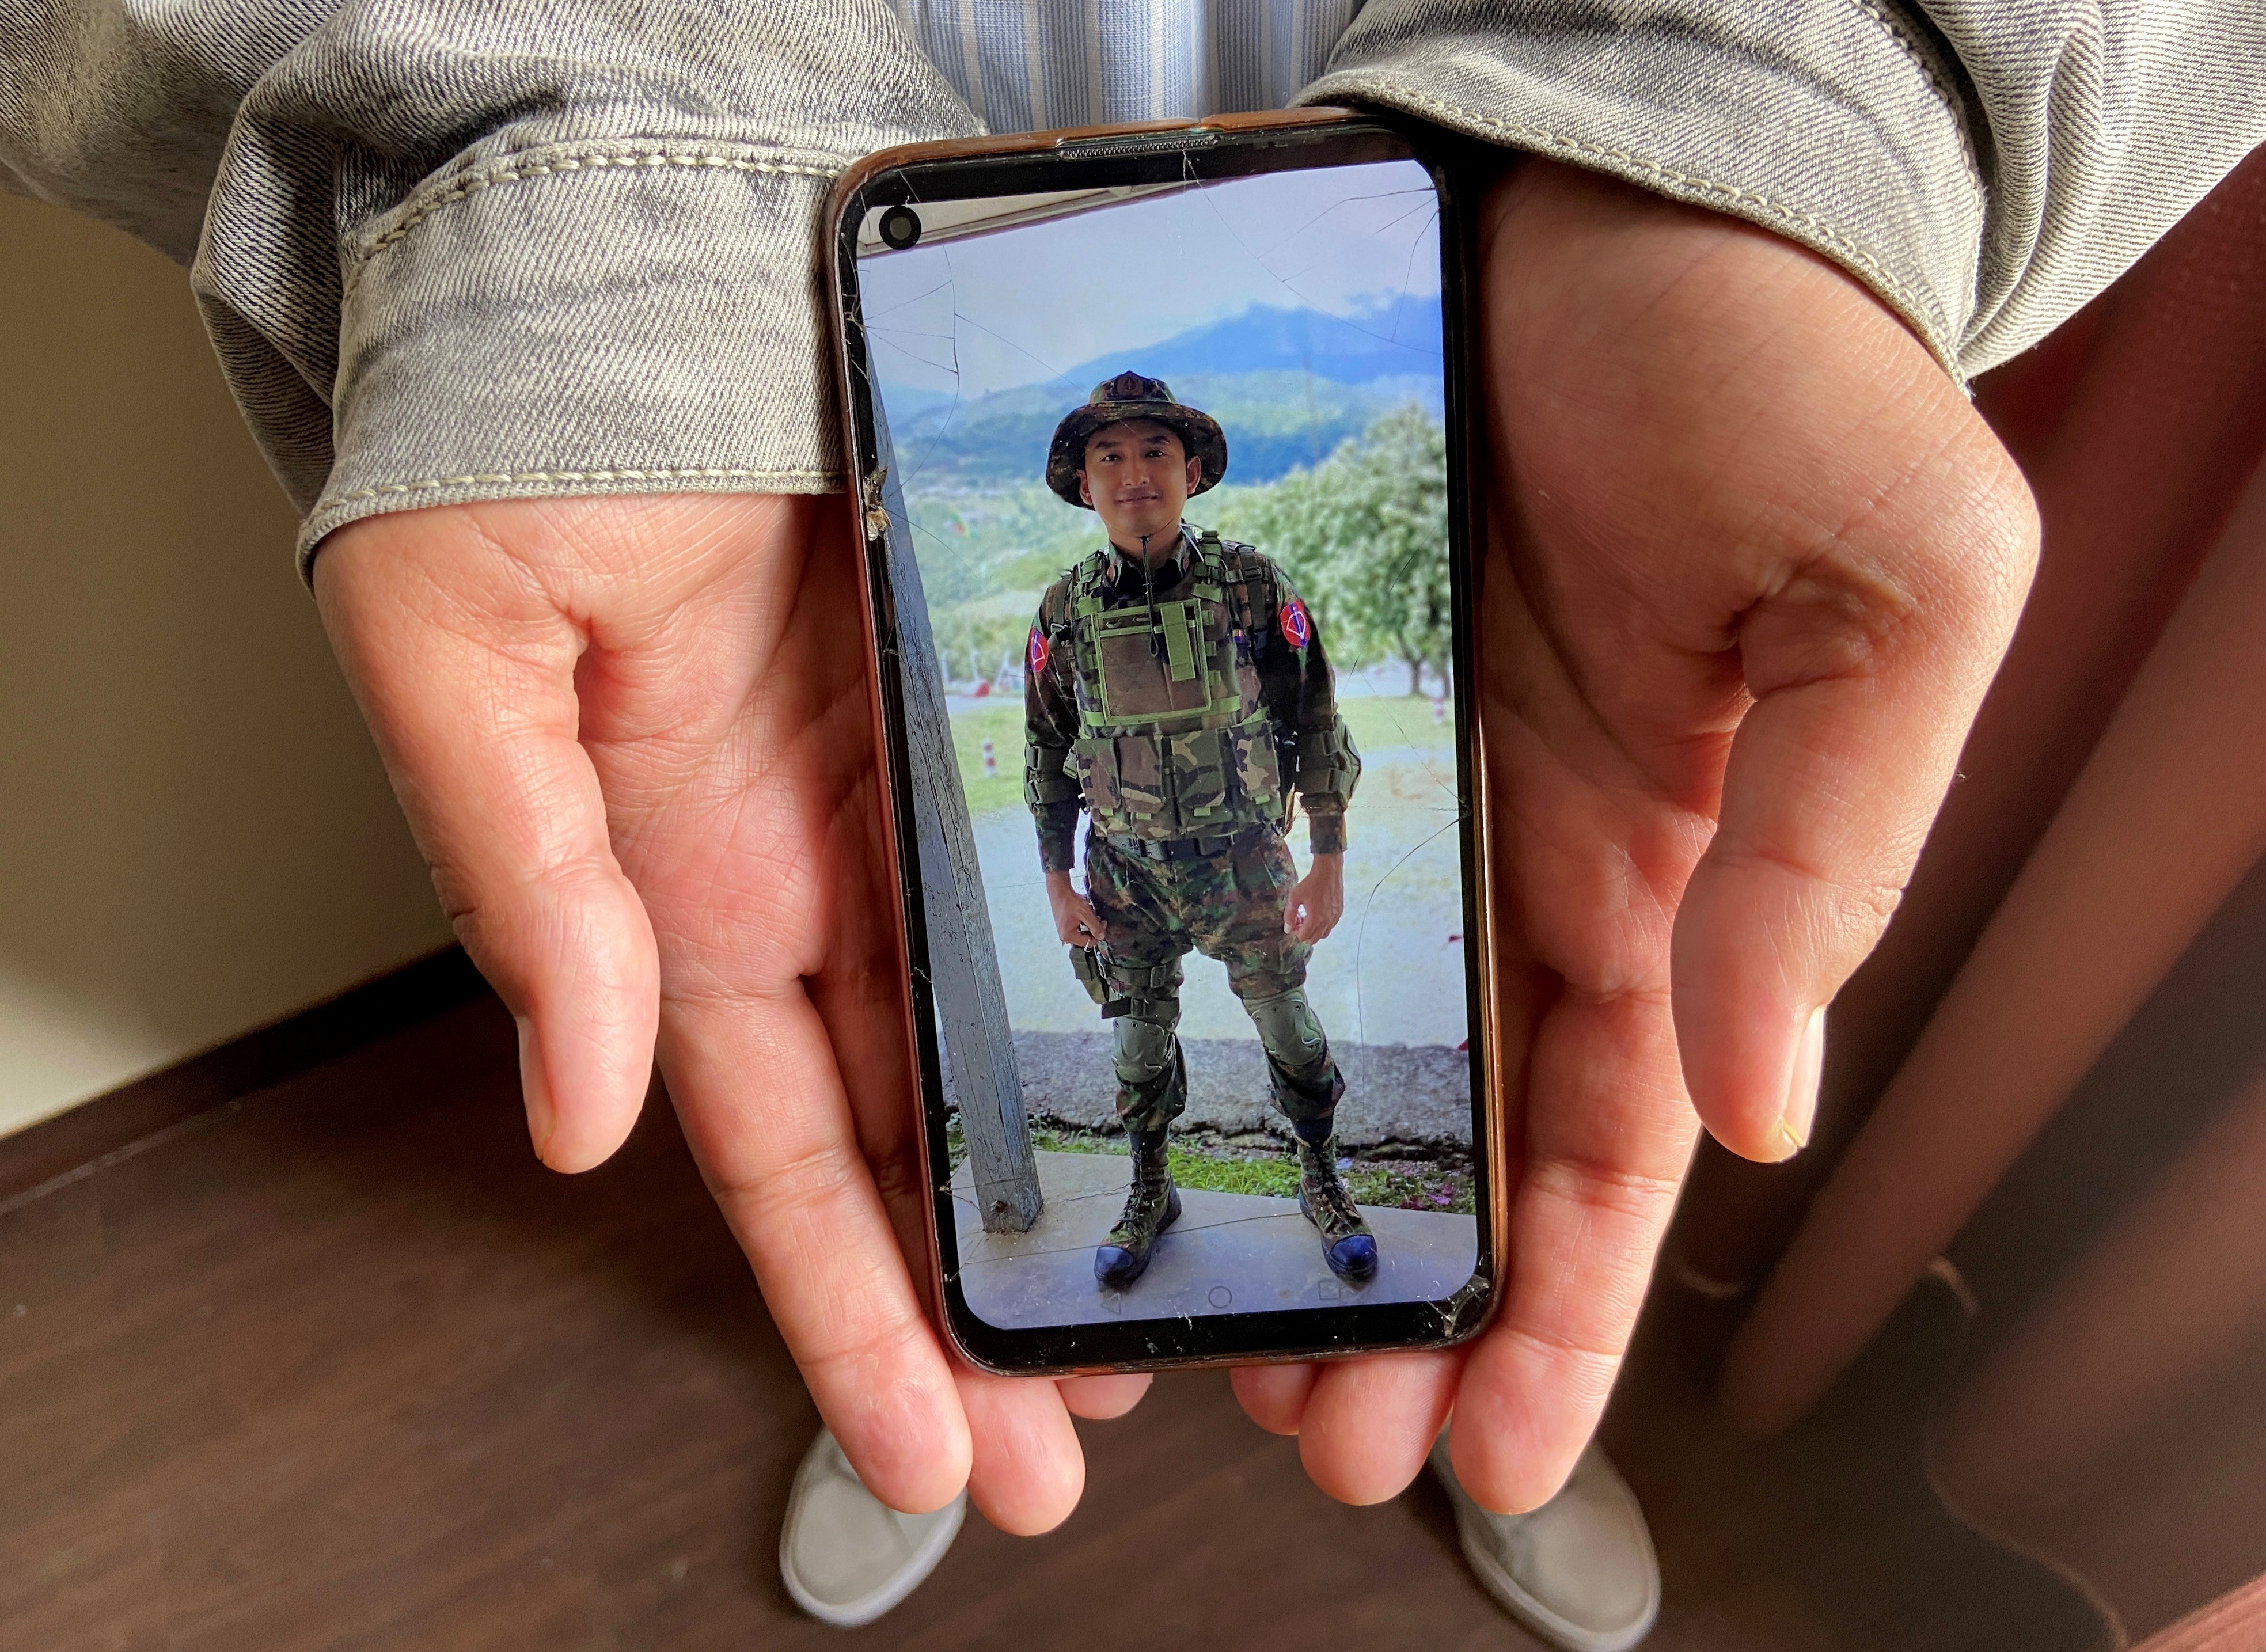 Kaung Thu Win shows a photograph of himself in Myanmar army uniform. Photo: Reuters